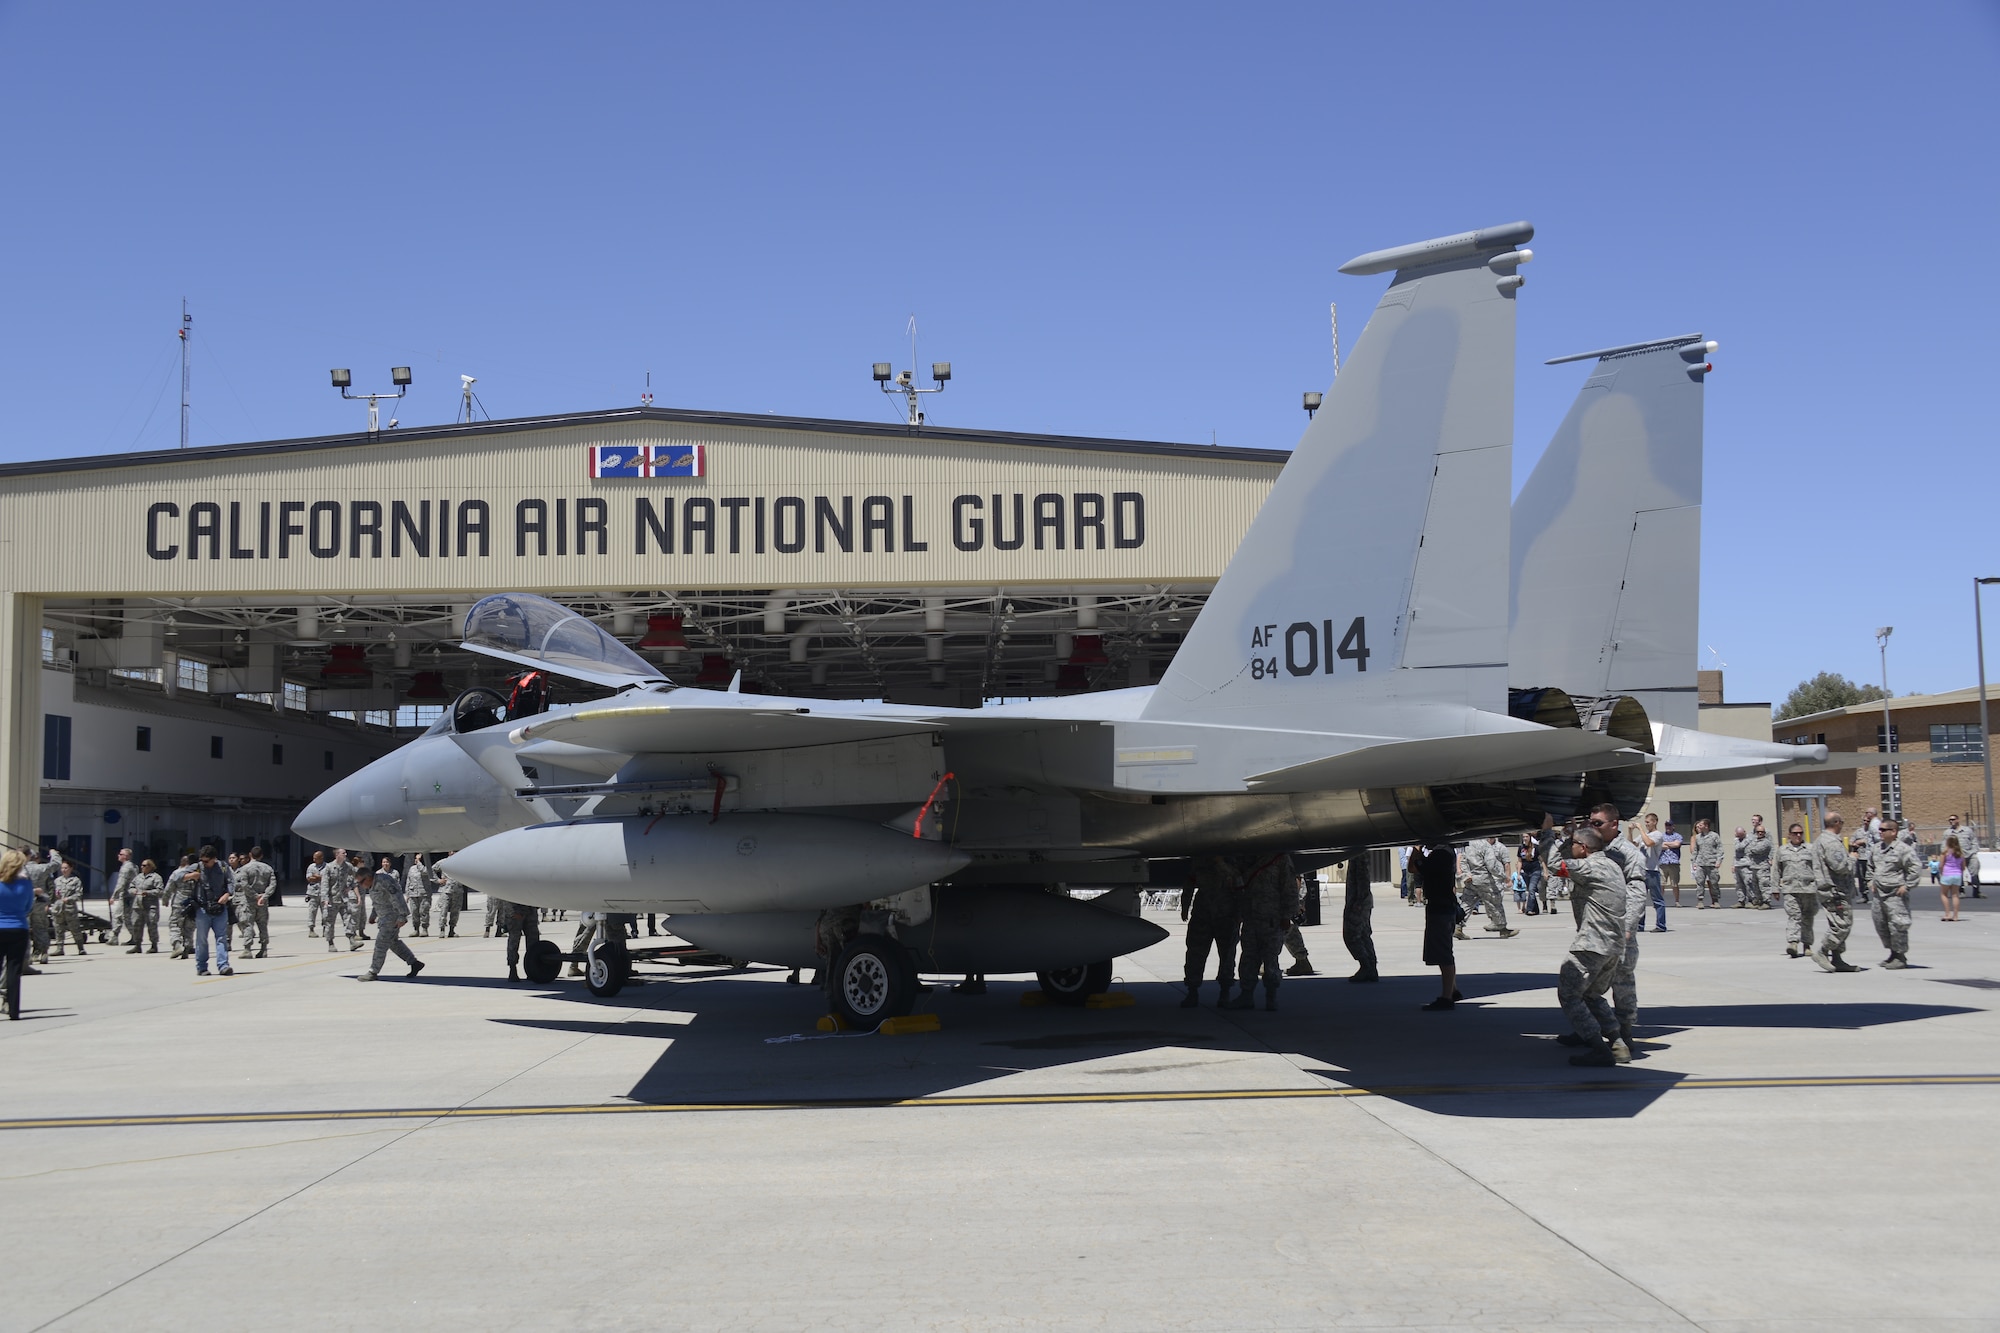 A U.S. Air Force F-15 Eagle sits on the ramp at the 144th Fighter Wing during a ceremony to welcome the first F-15 Eagle to the Fresno Air National Guard Base, Calif., June 18, 2013. This F-15 is the first of several F-15s that will join the unit as part of the 144th Fighter Wing's conversion from F-16 Fighting Falcon to the F-15 Eagle. (Air National Guard photo by Tech. Sgt.Charles Vaughn) 